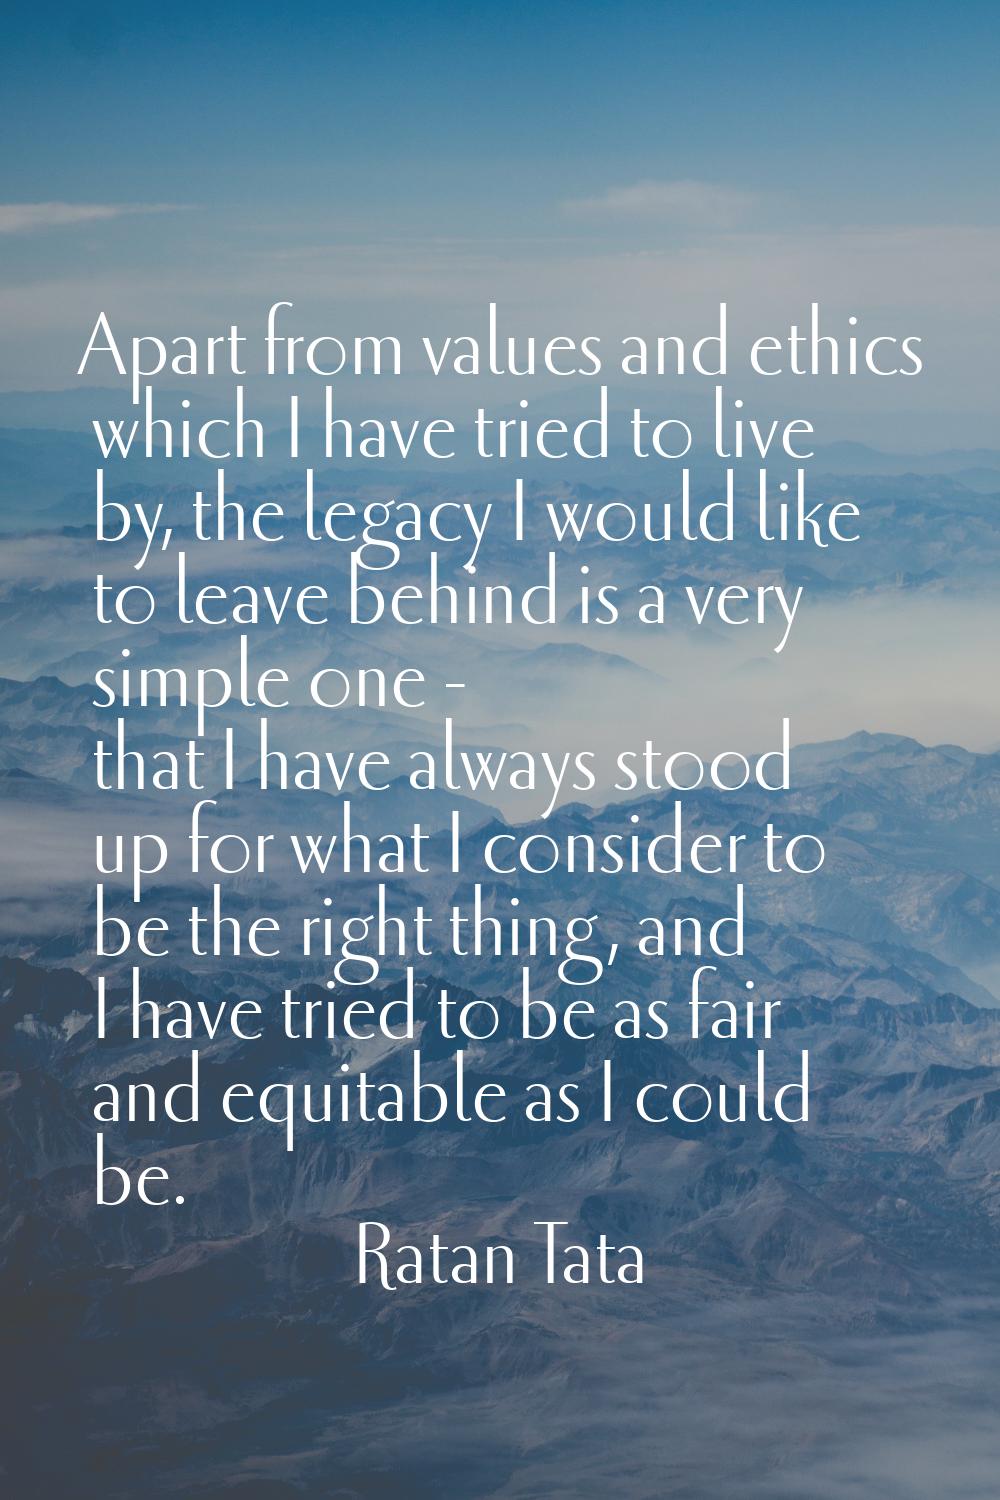 Apart from values and ethics which I have tried to live by, the legacy I would like to leave behind